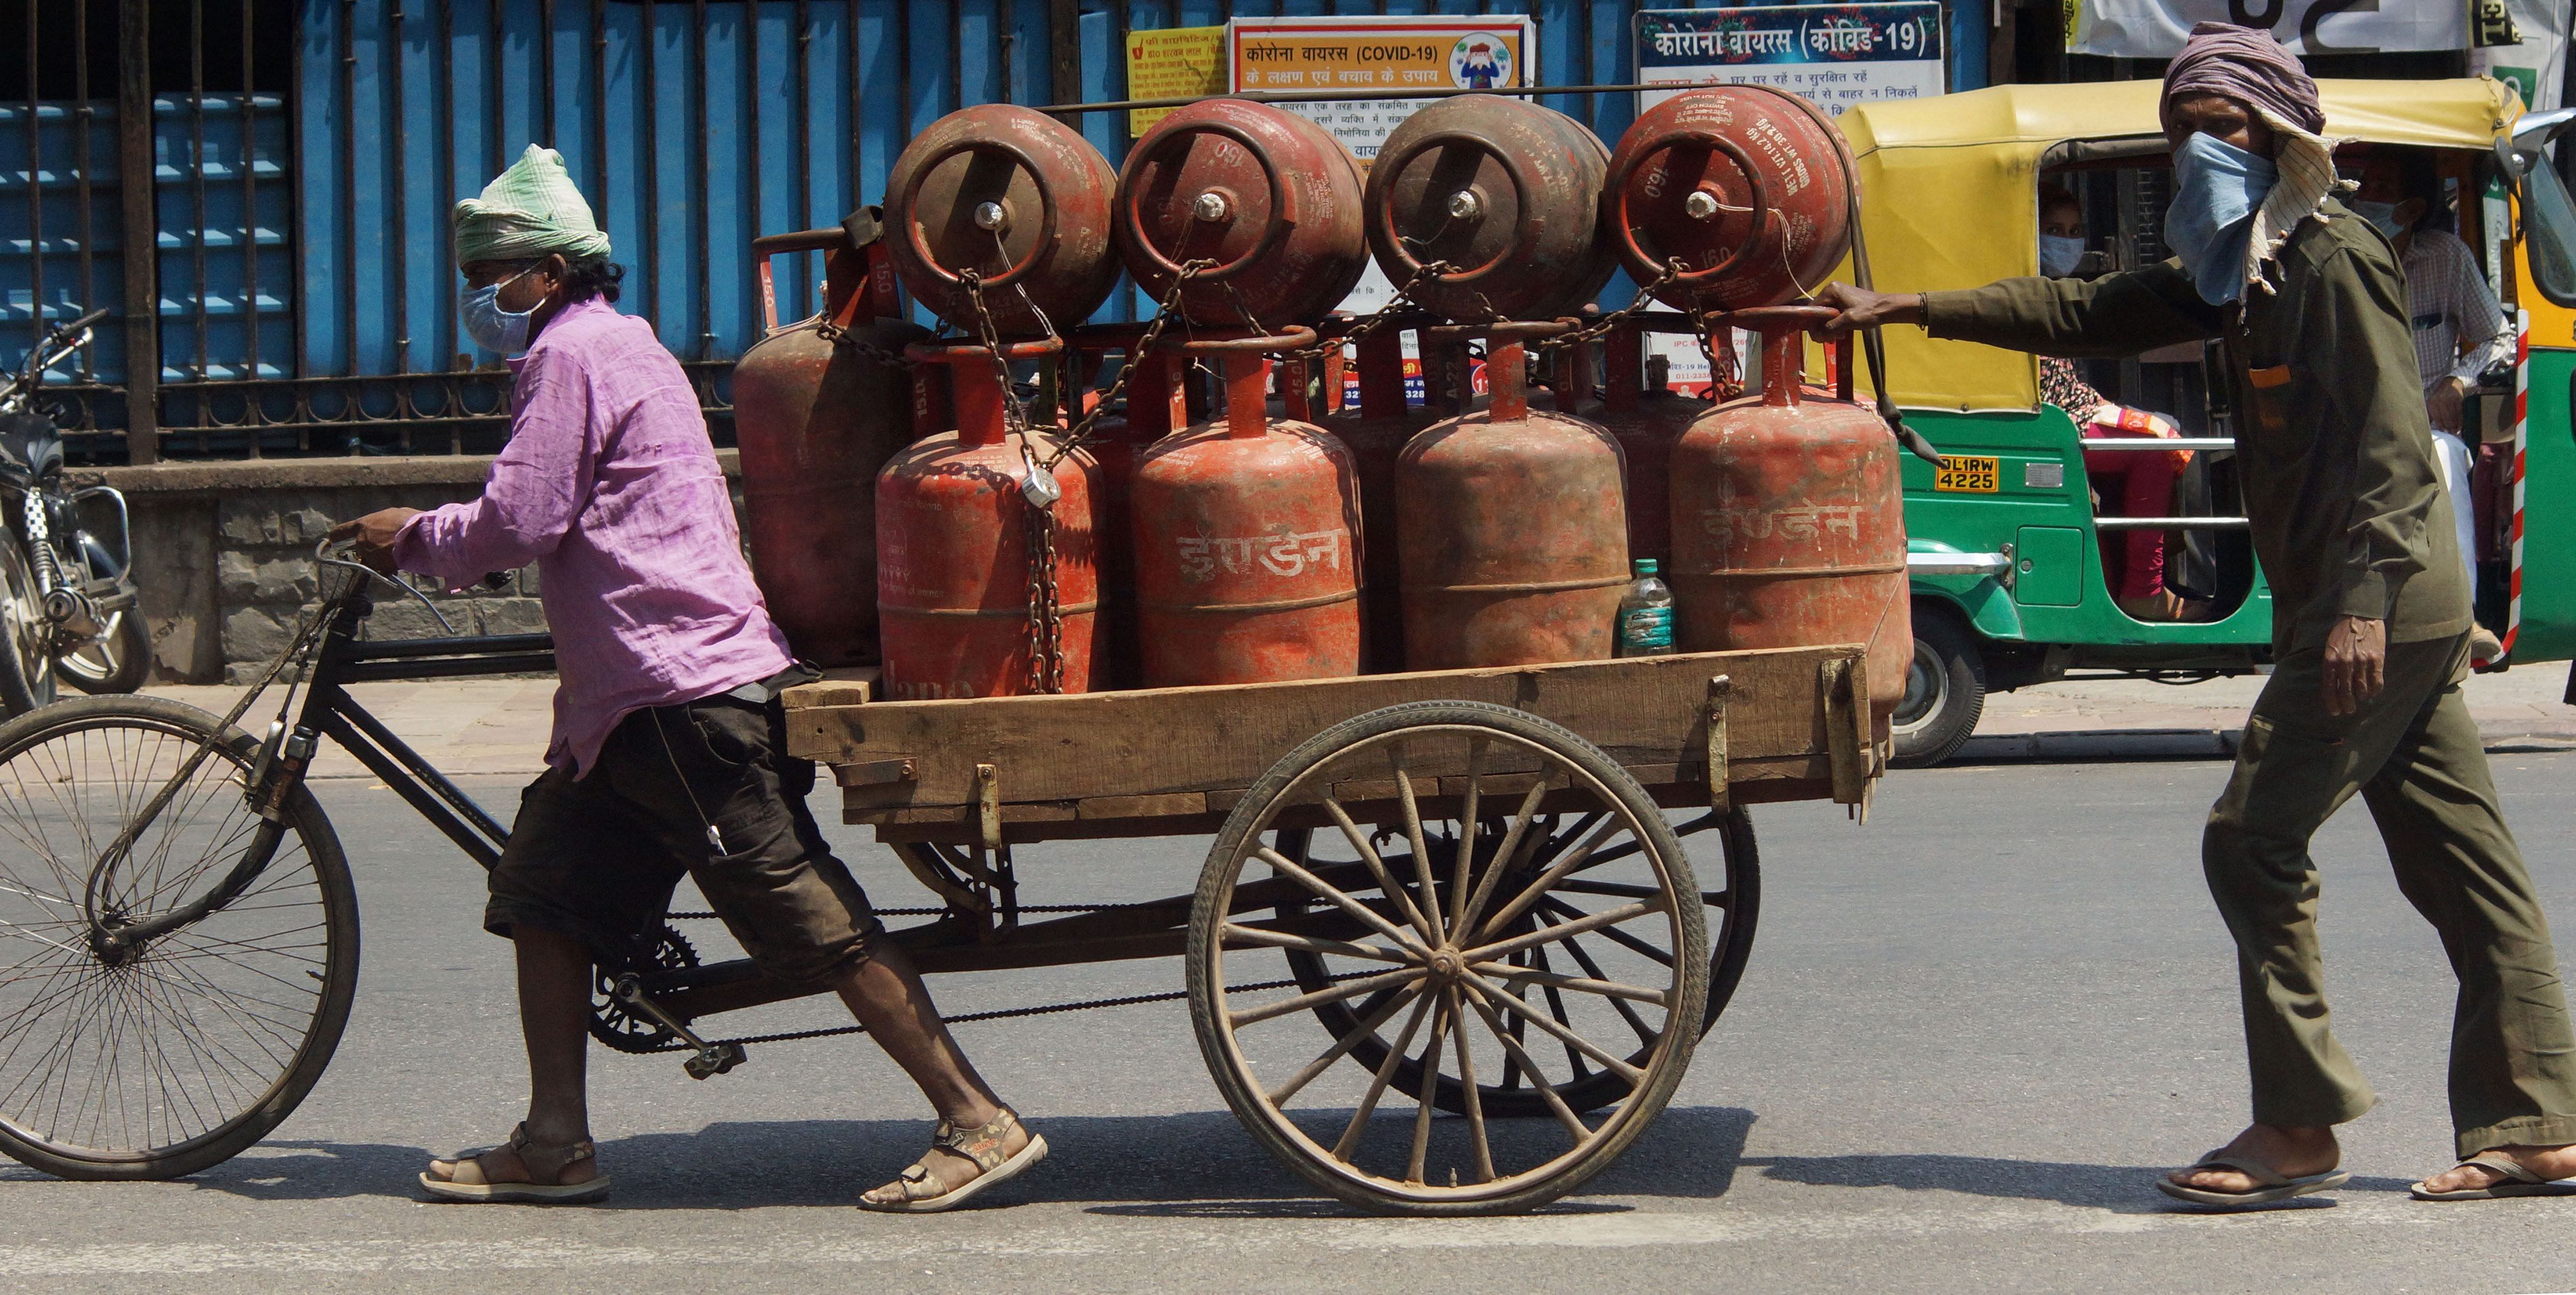 Workers push a cart loaded with LPG cylinders, during the nationwide lockdown to curb the spread of coronavirus. (PTI Photo)